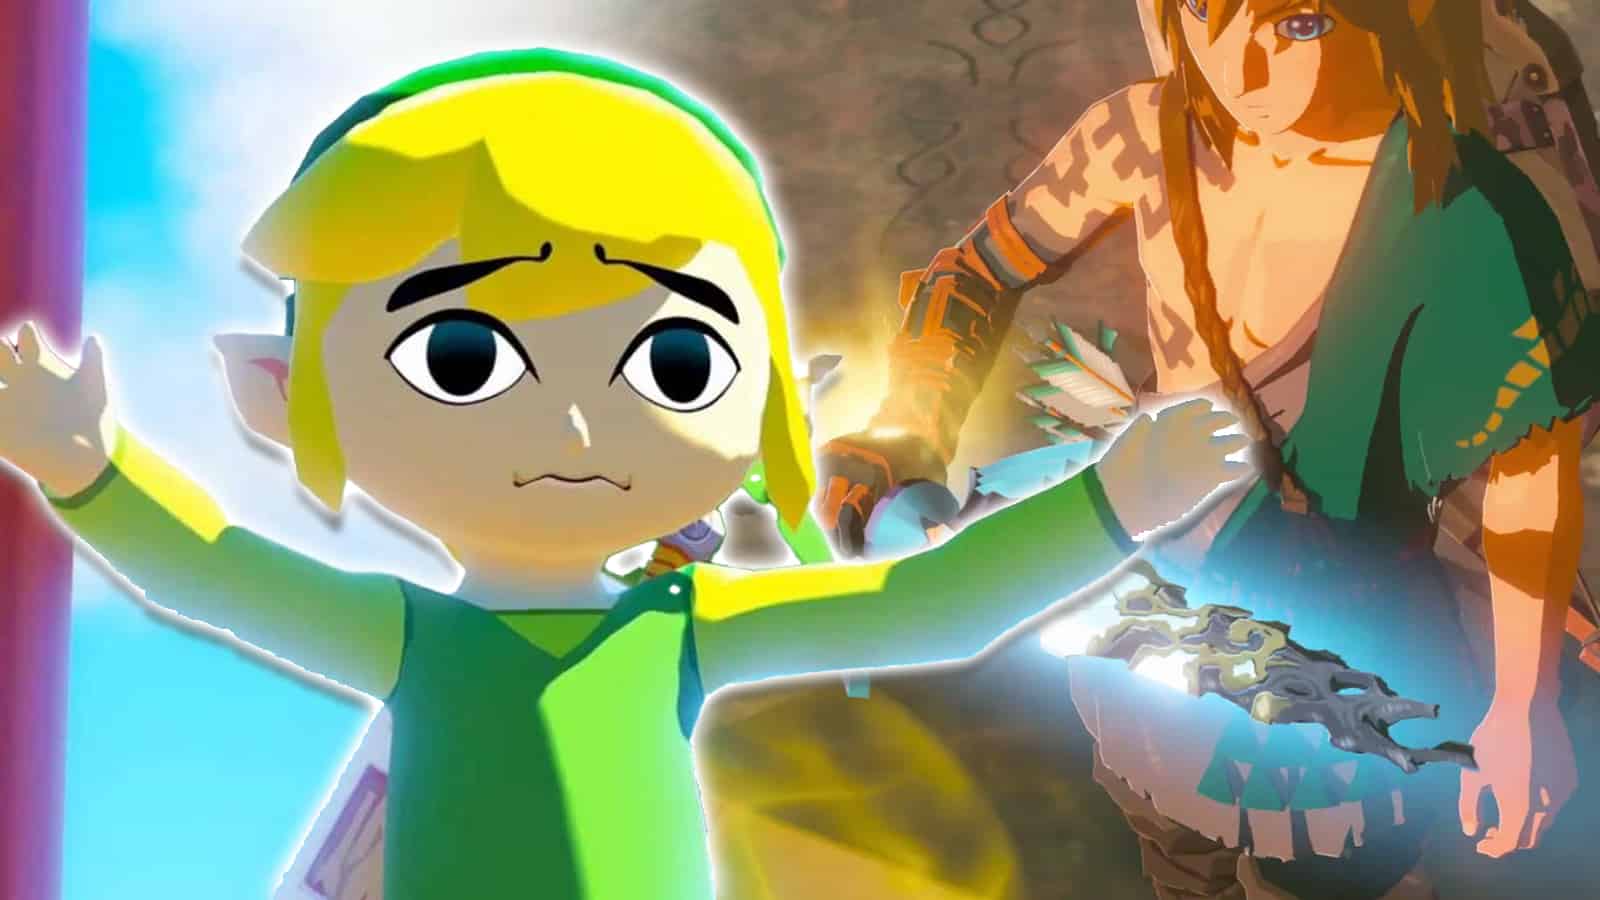 Zelda fans call for Wind Waker HD on Switch following Breath of the Wild 2 delay